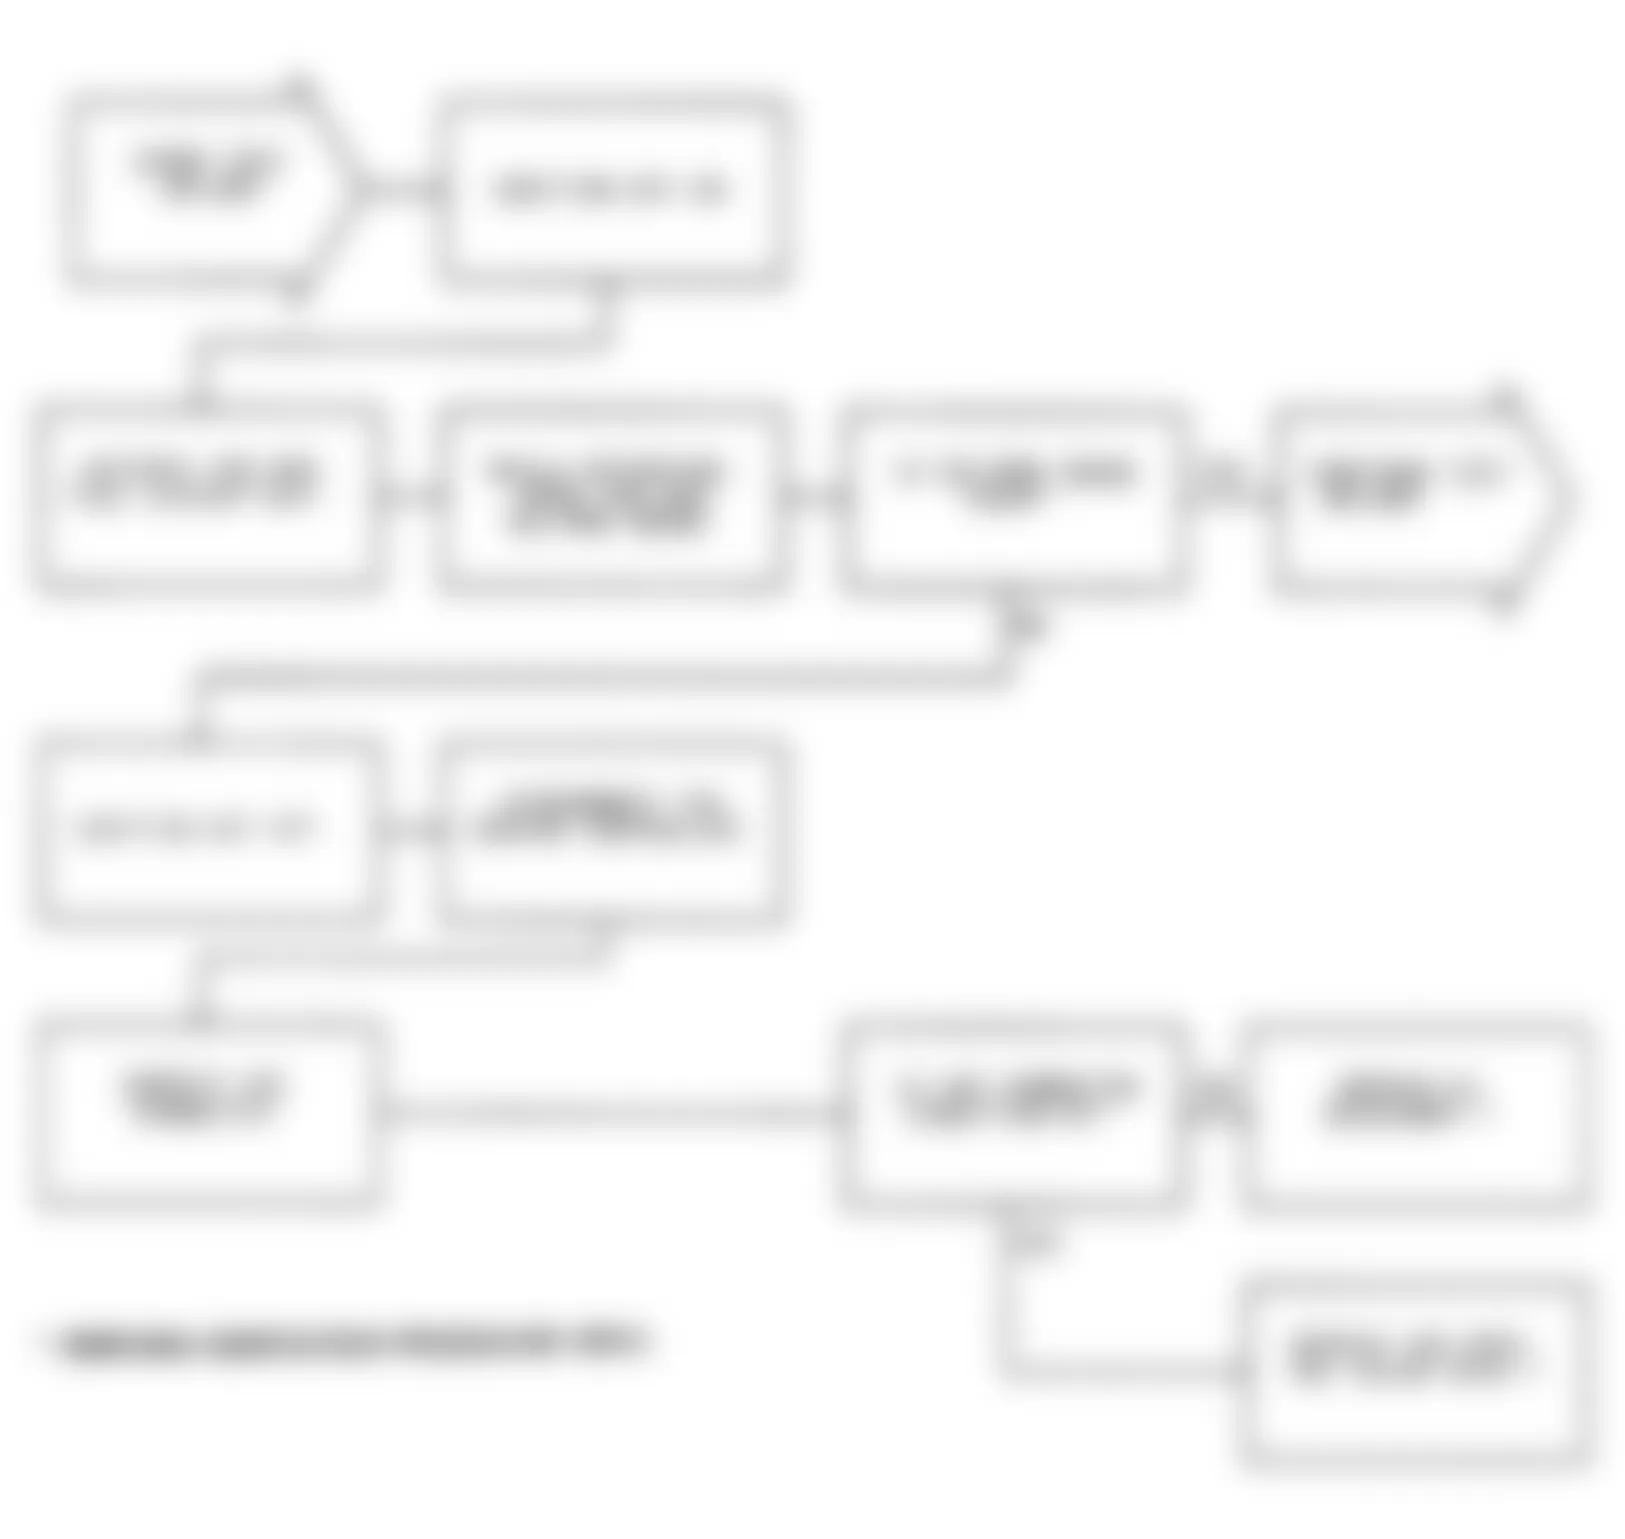 Chrysler Imperial 1991 - Component Locations -  Test DR-28A Code 42: Flowchart (1 of 2)